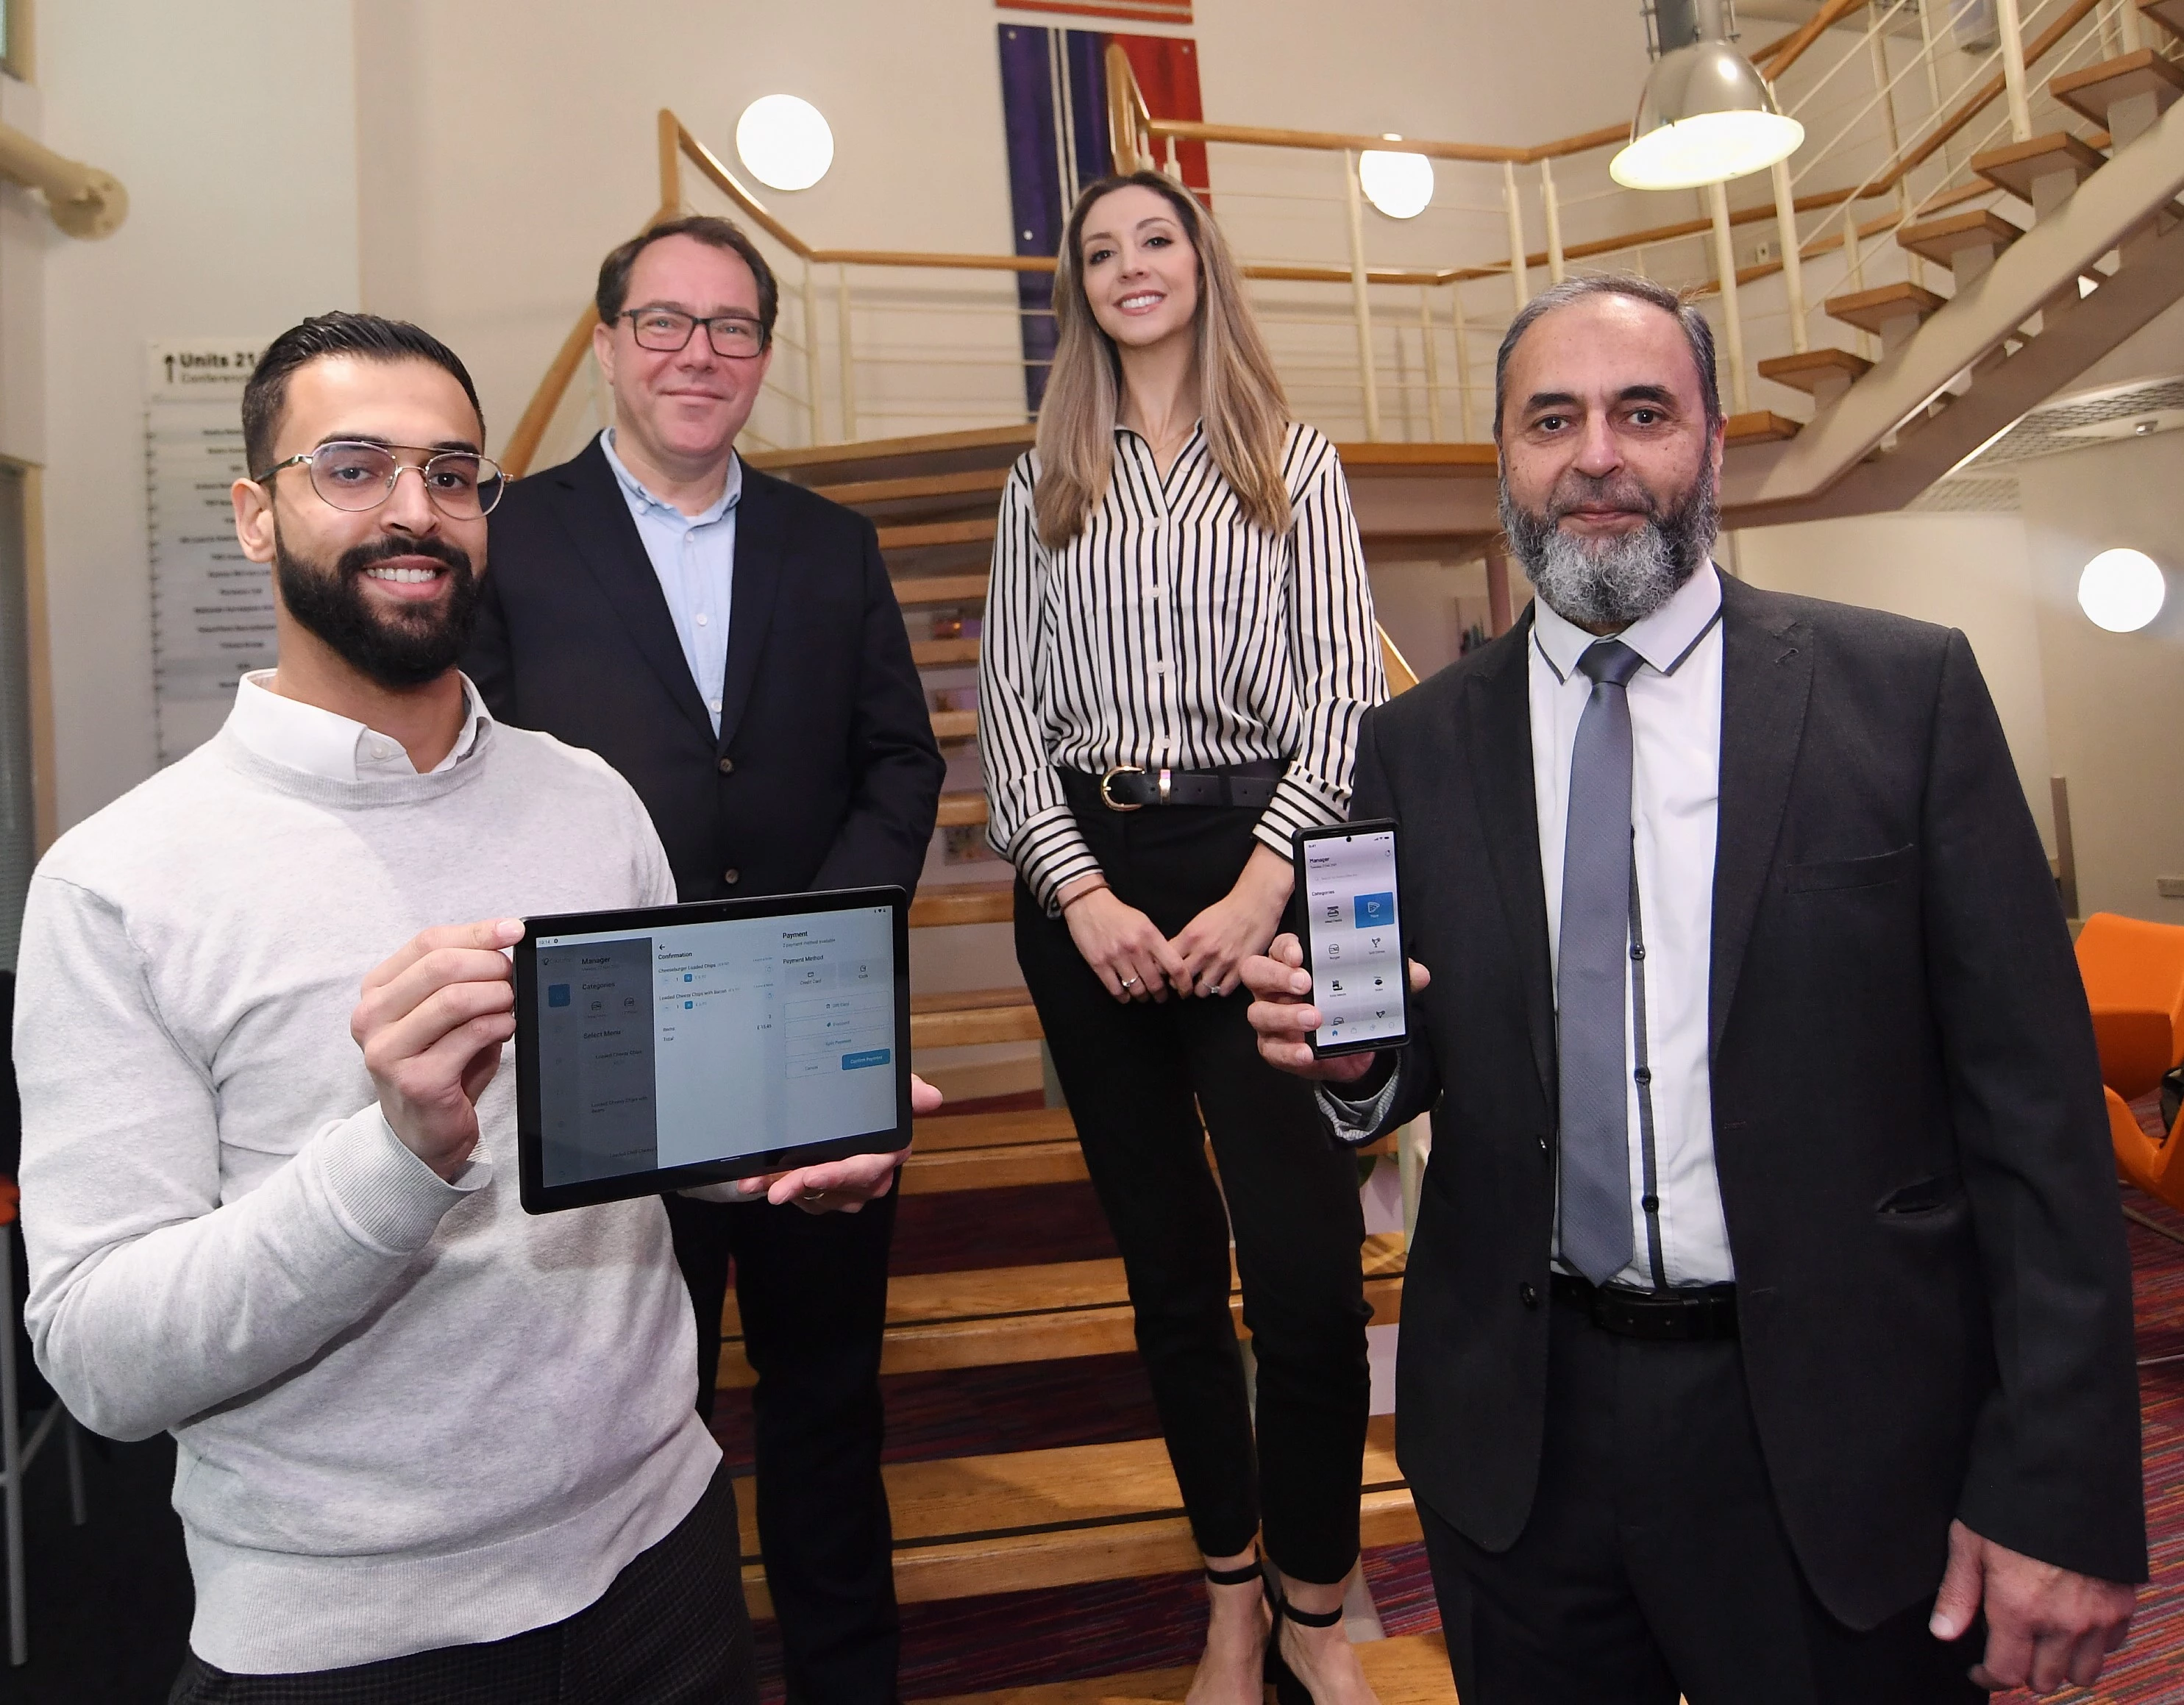 From left: Ahmed Sadeeq, Dirk Schaefer (SME Engagement Lead at University of Warwick Science Park), Victoria Lynch, and Farrukh Khawaja (Olouris)